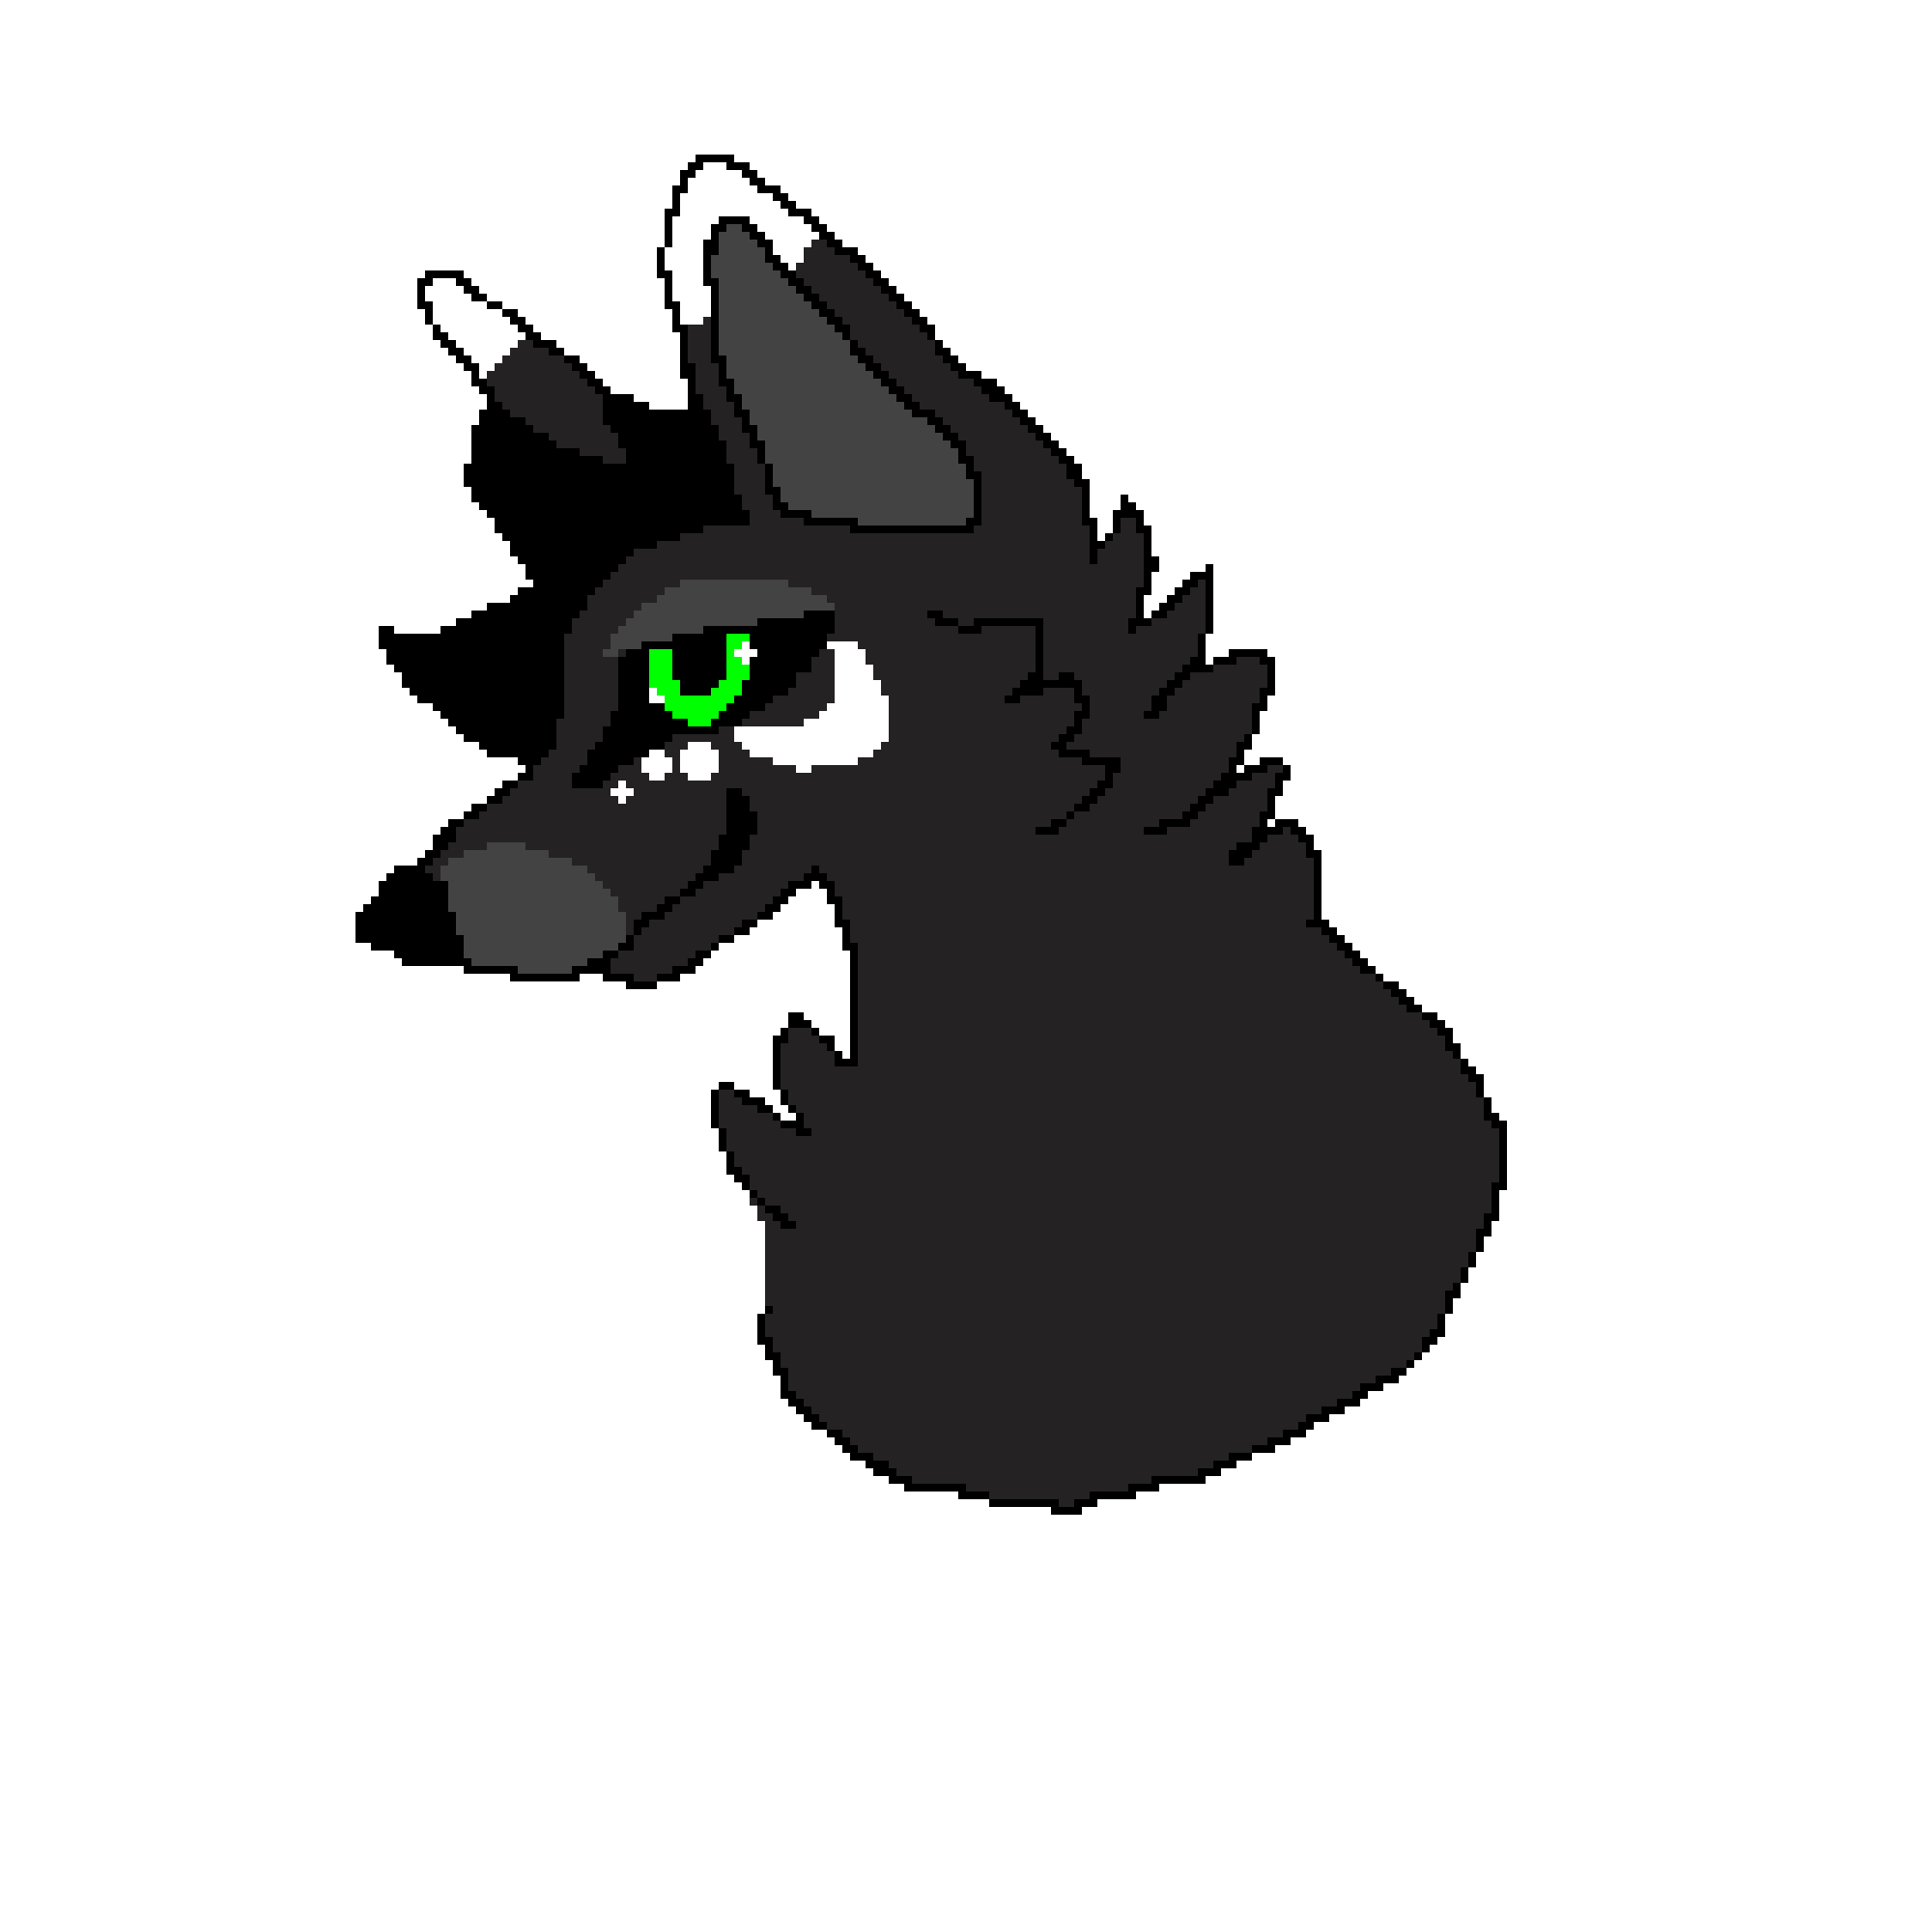 Rune the wolf oc please don’t copy any of my oc’s